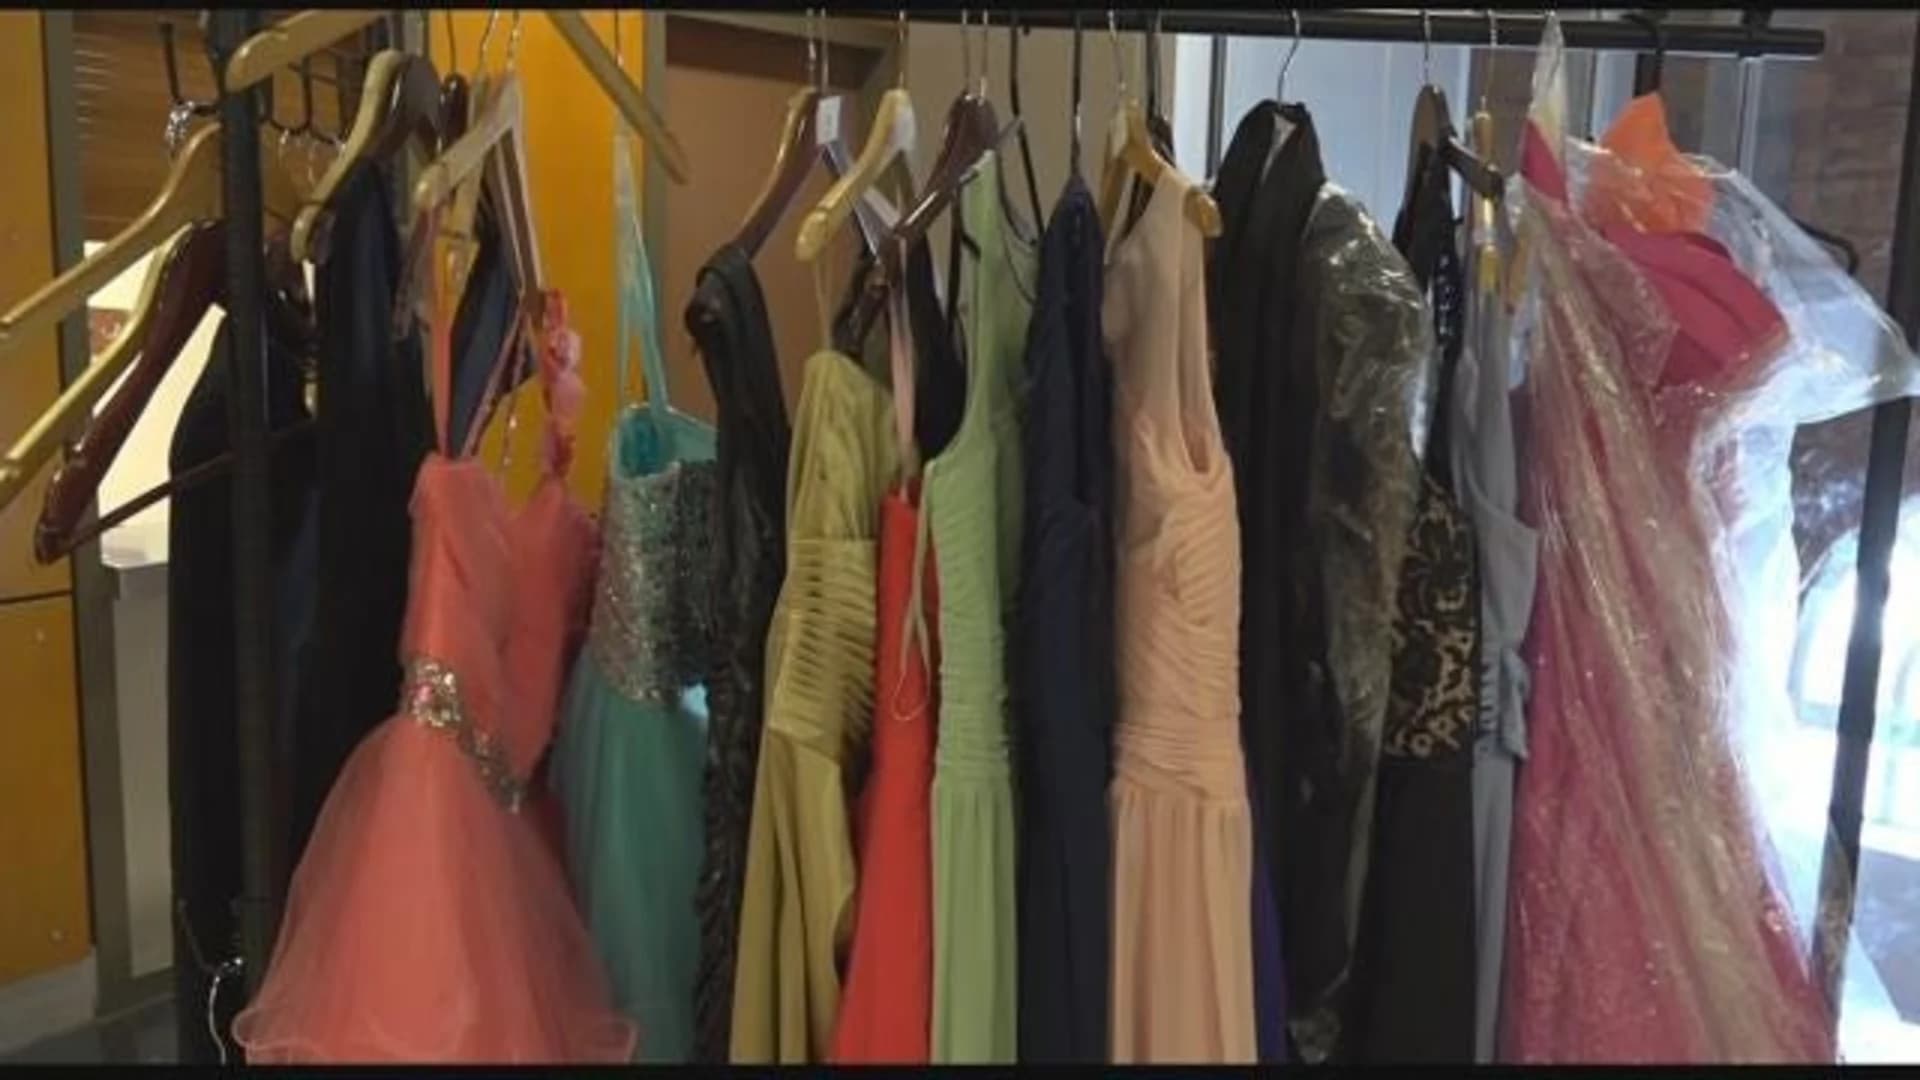 Bronx pop-up shop gives away free prom outfits